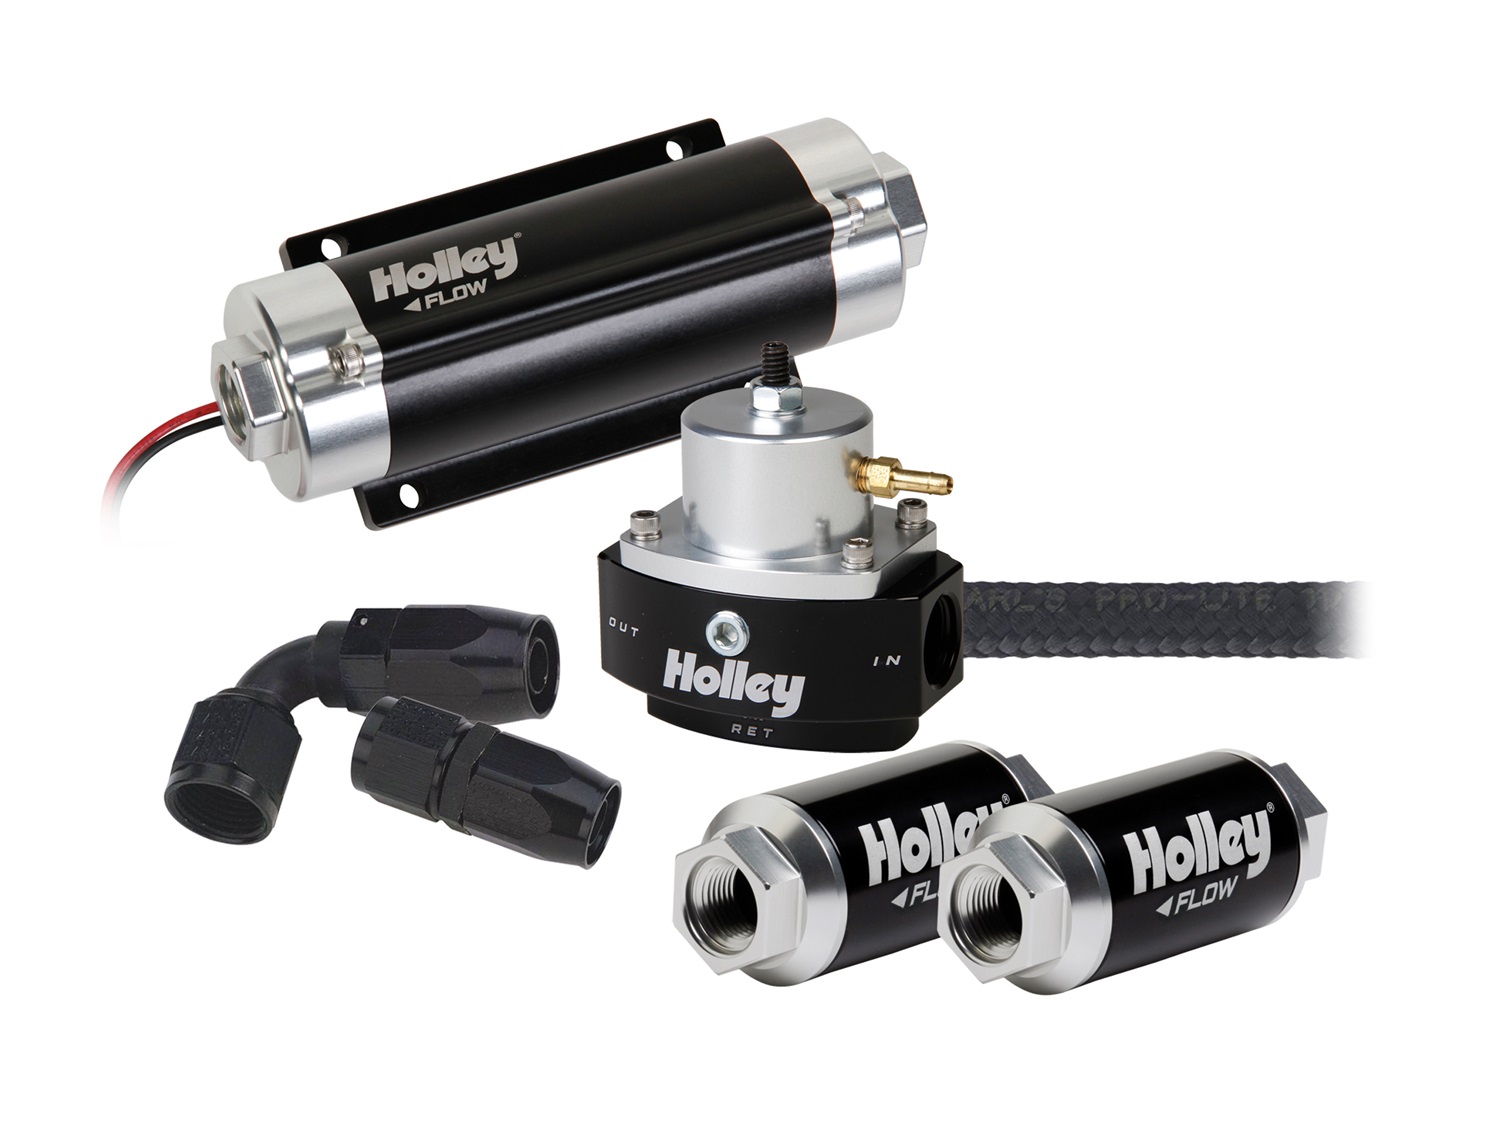 Holley Performance Holley Performance 526-2 EFI Fuel System Kit